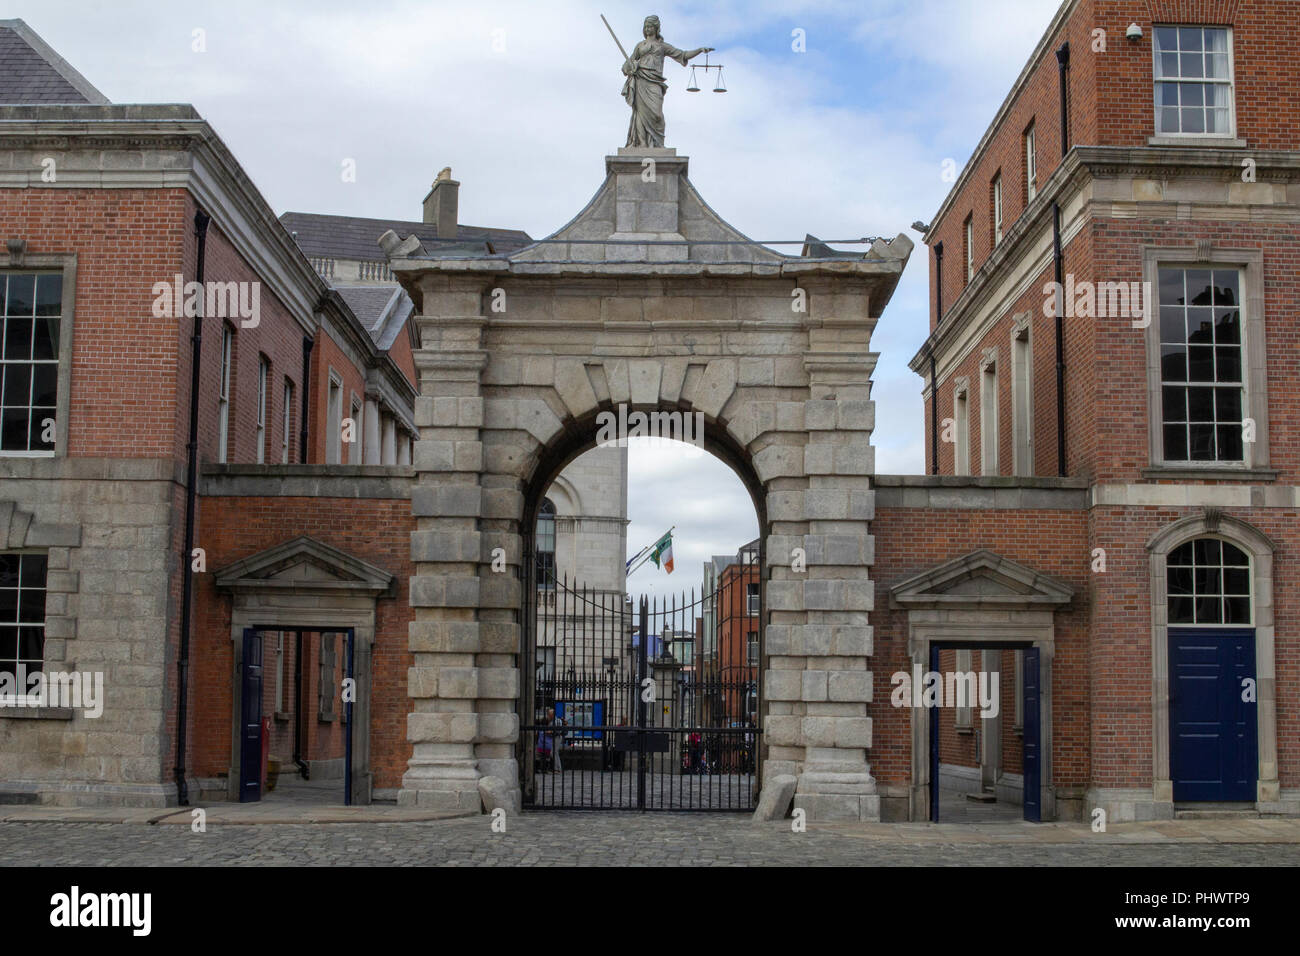 A gate in Dublin Castle, Ireland with the statue of Lady Justice atop holding a sword in one hand and the scales of justice in the other. Stock Photo